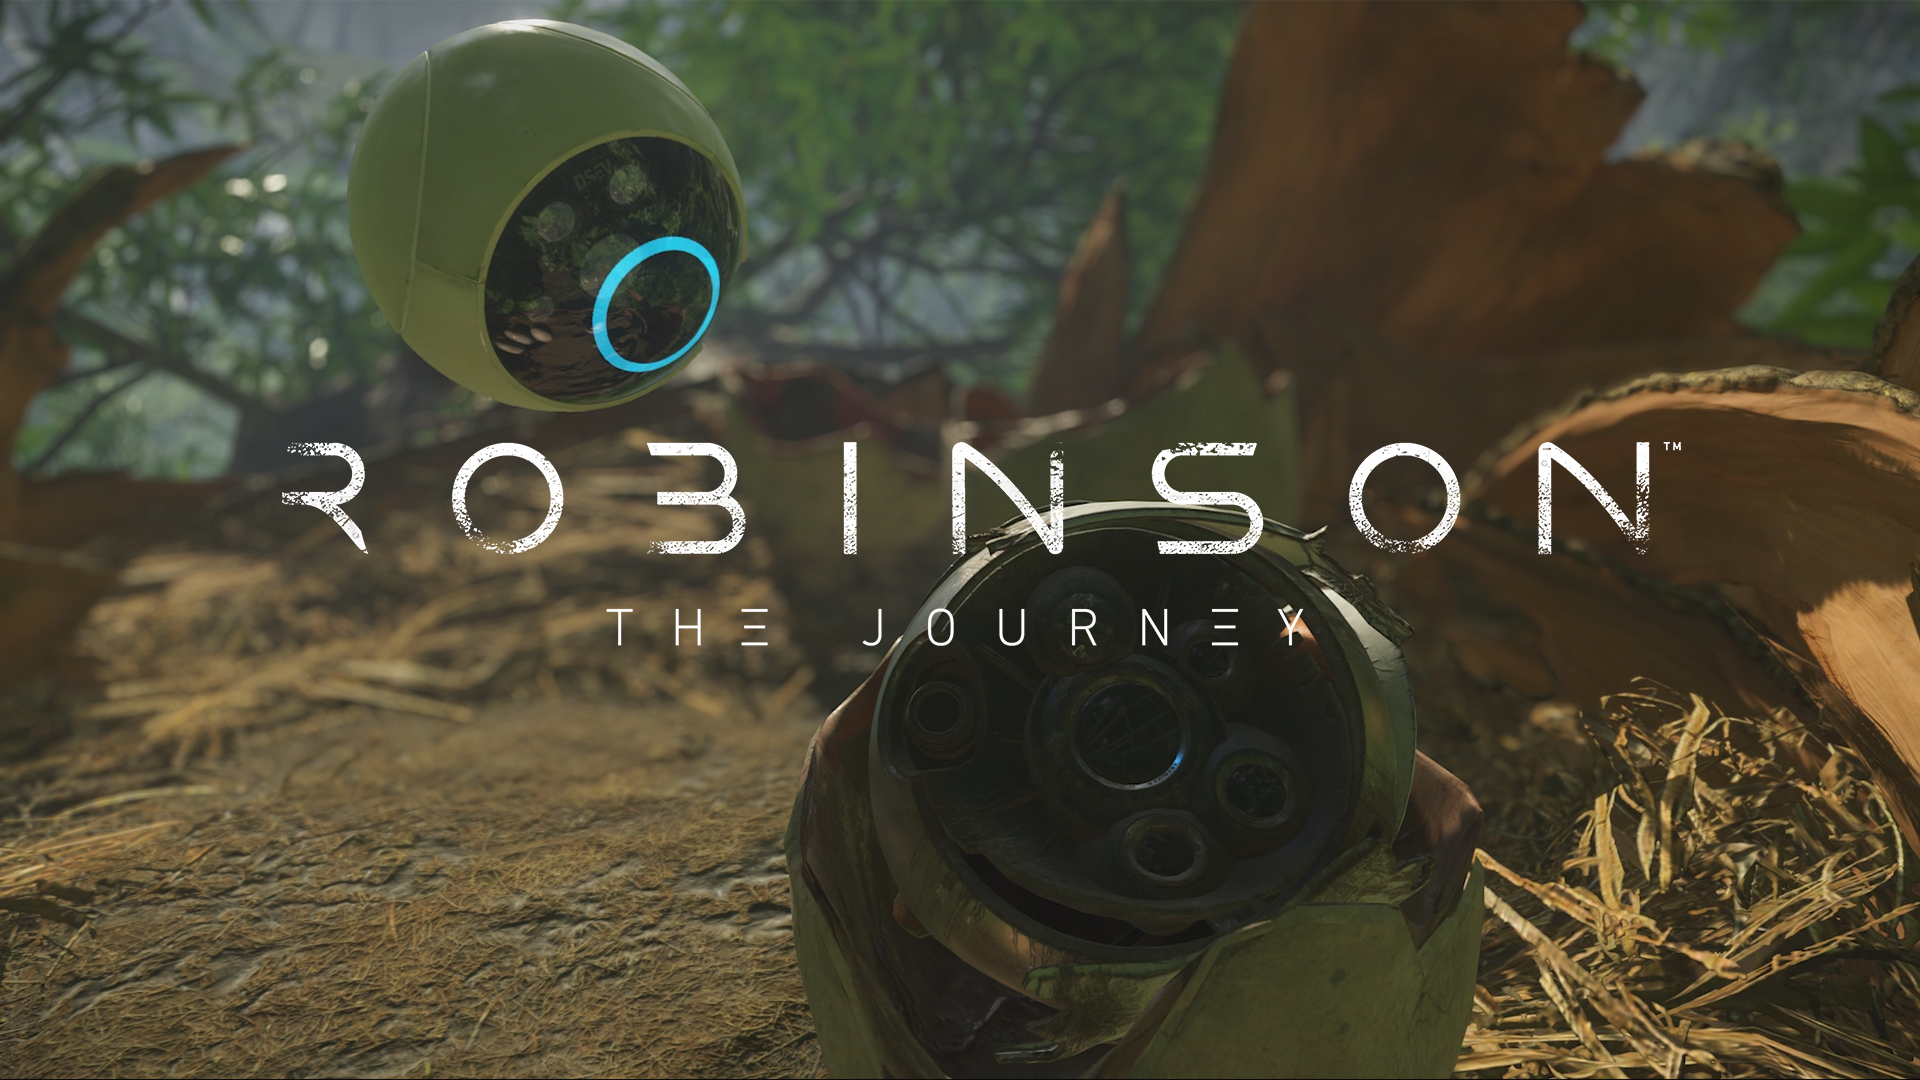 Explore a new world in stunning - ROBINSON: THE JOURNEY IS HERE – CHECK OUT THE LAUNCH DAY TRAILER